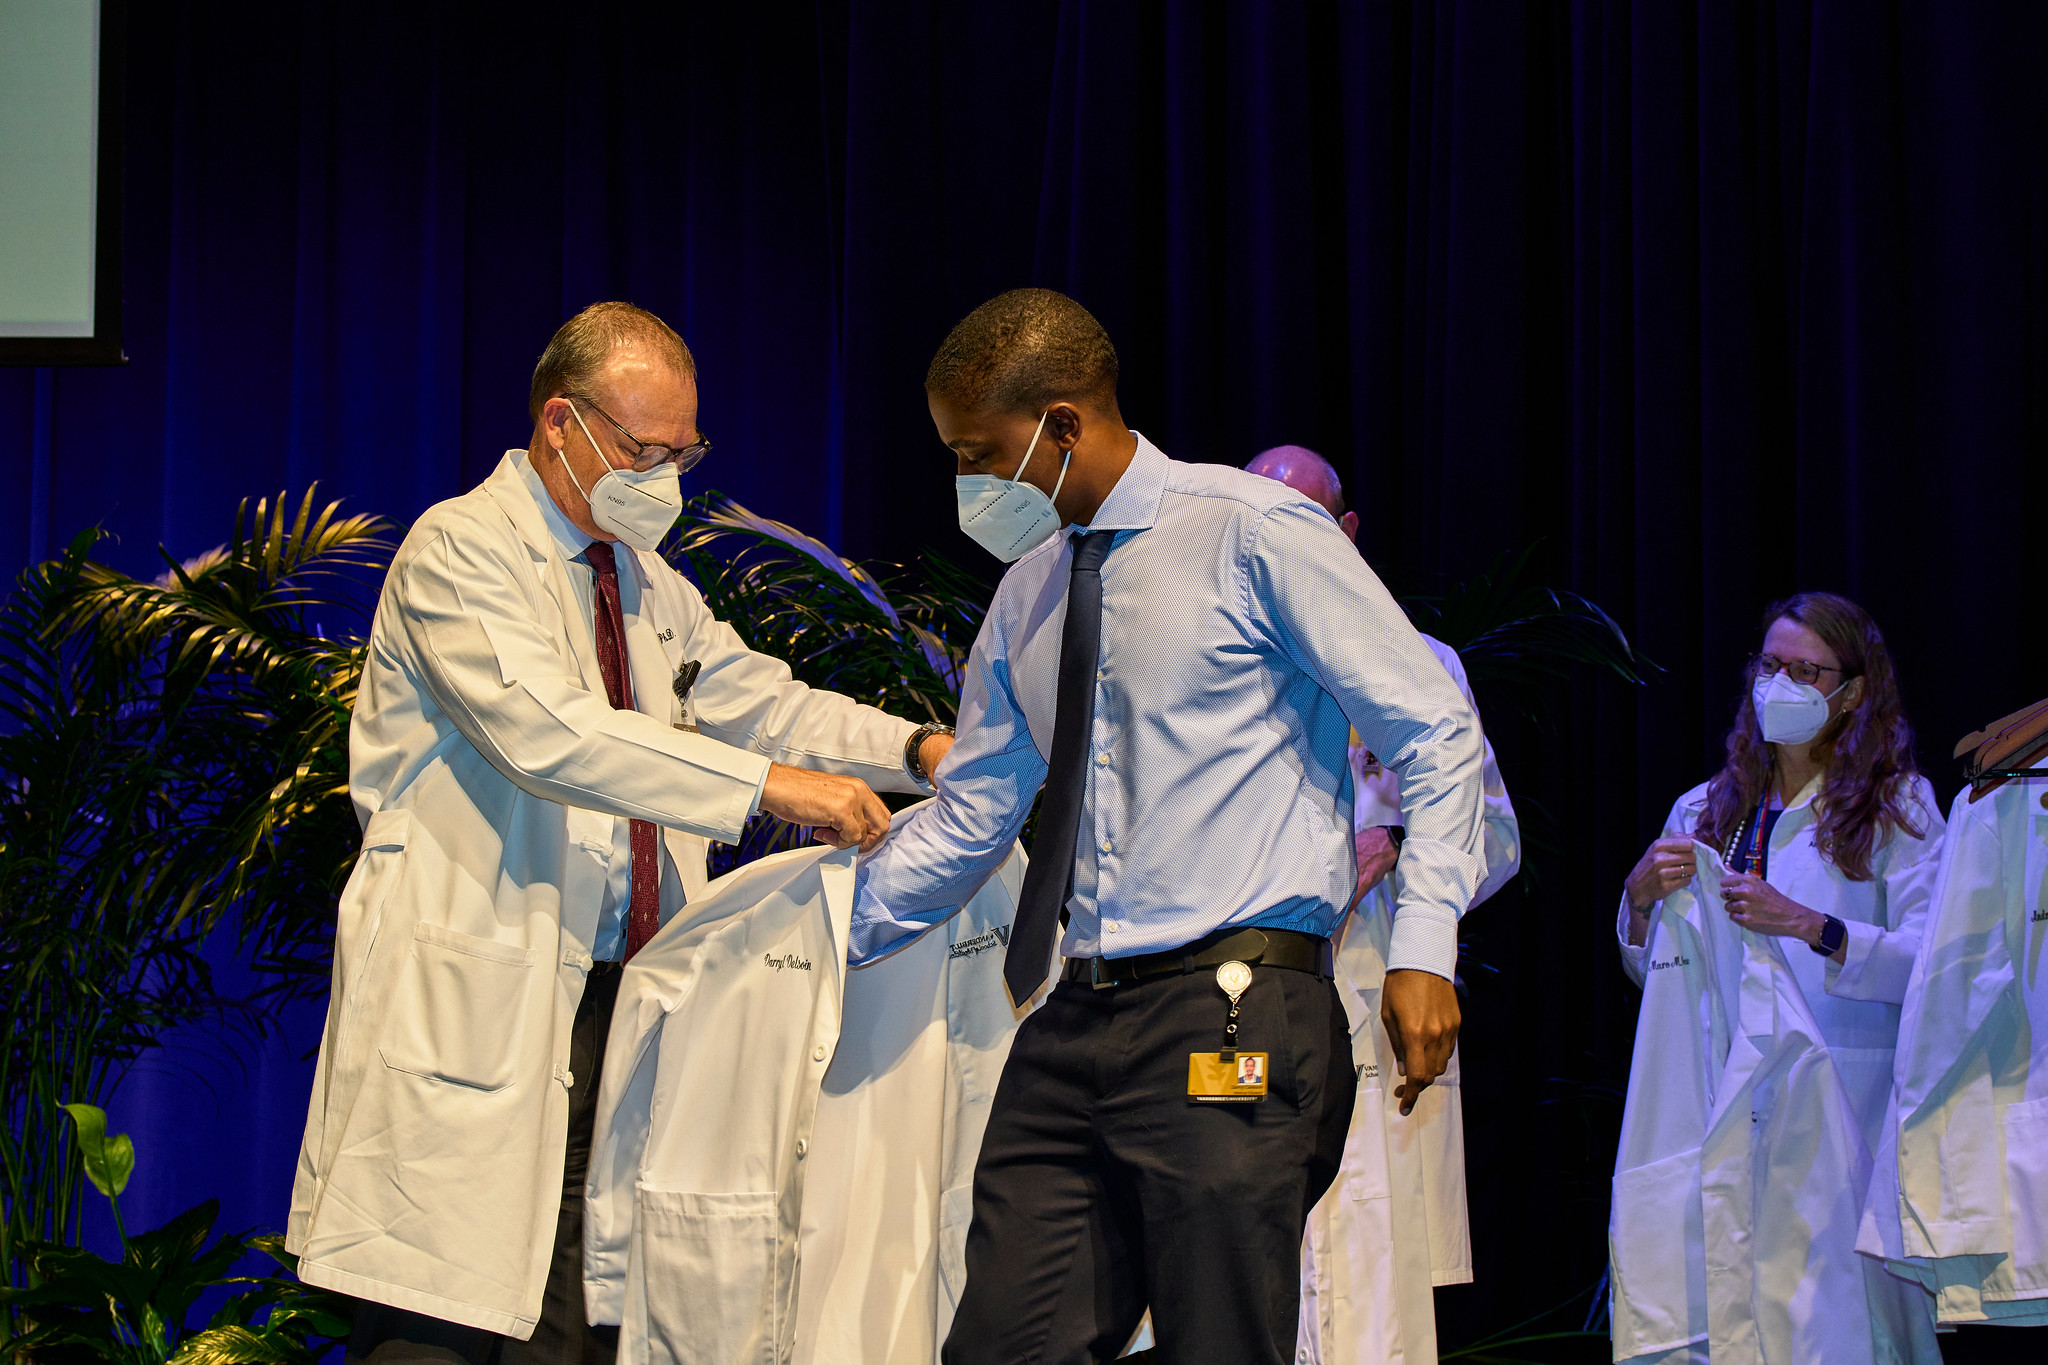 A man in a long white coat helps a student to put on a short white coat